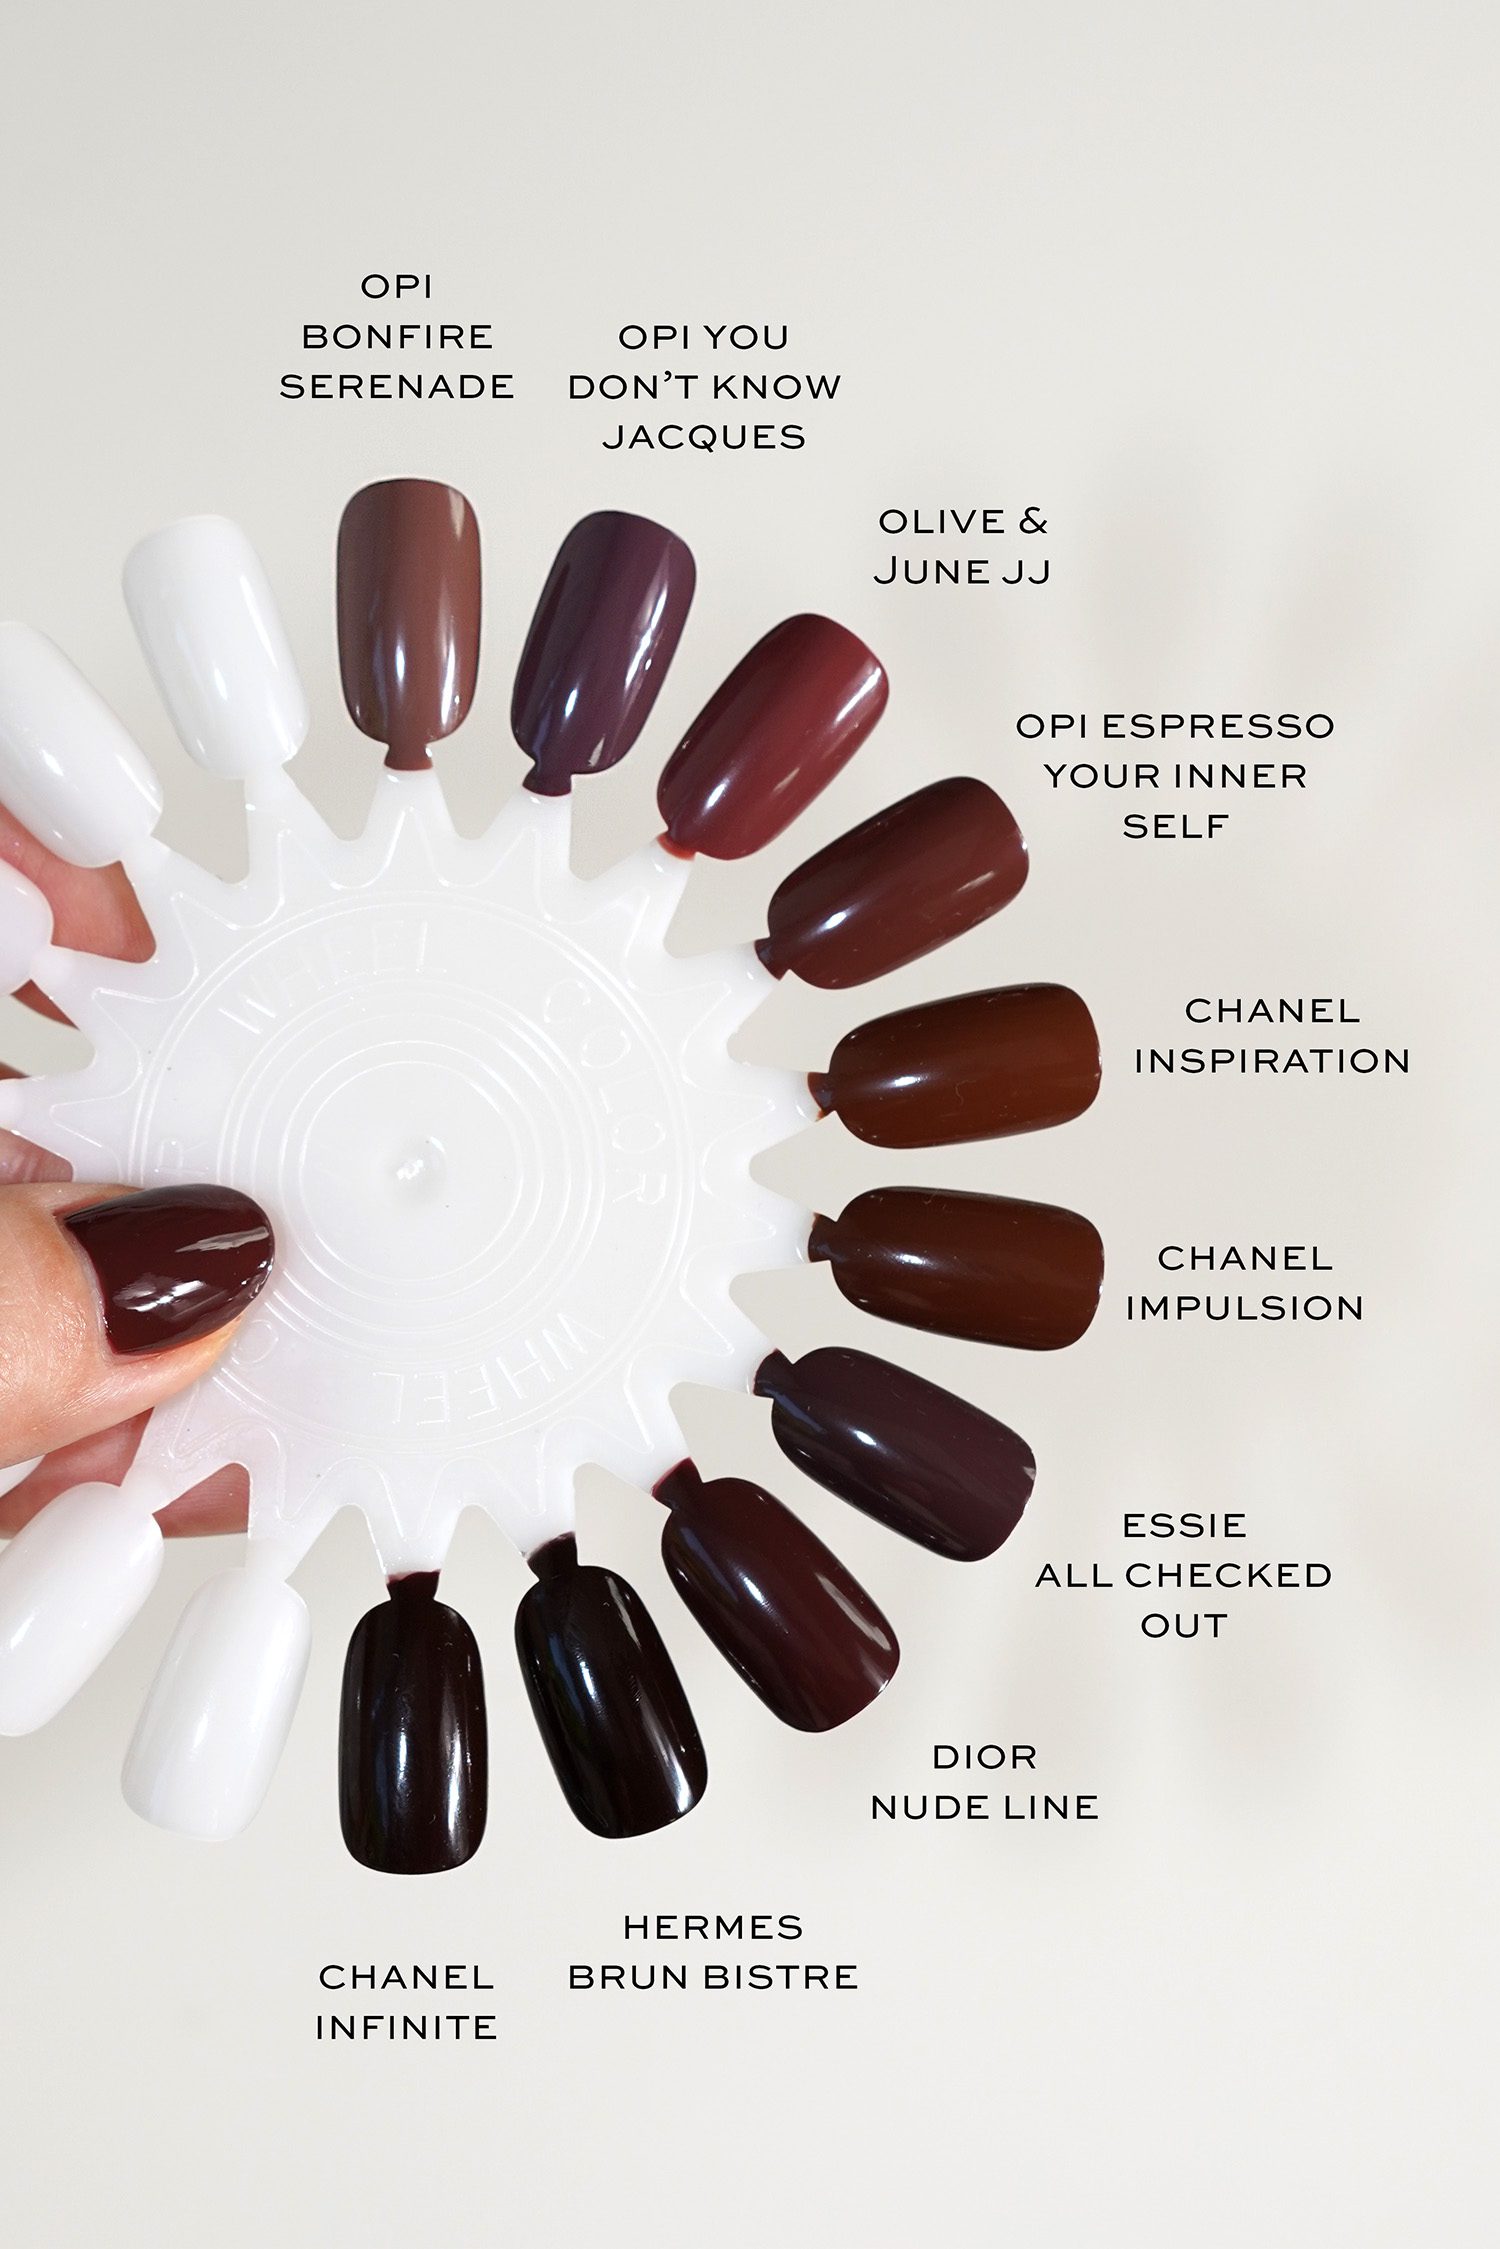 46 Trendy Brown Nail Design Ideas For Any Occasion - Days Inspired